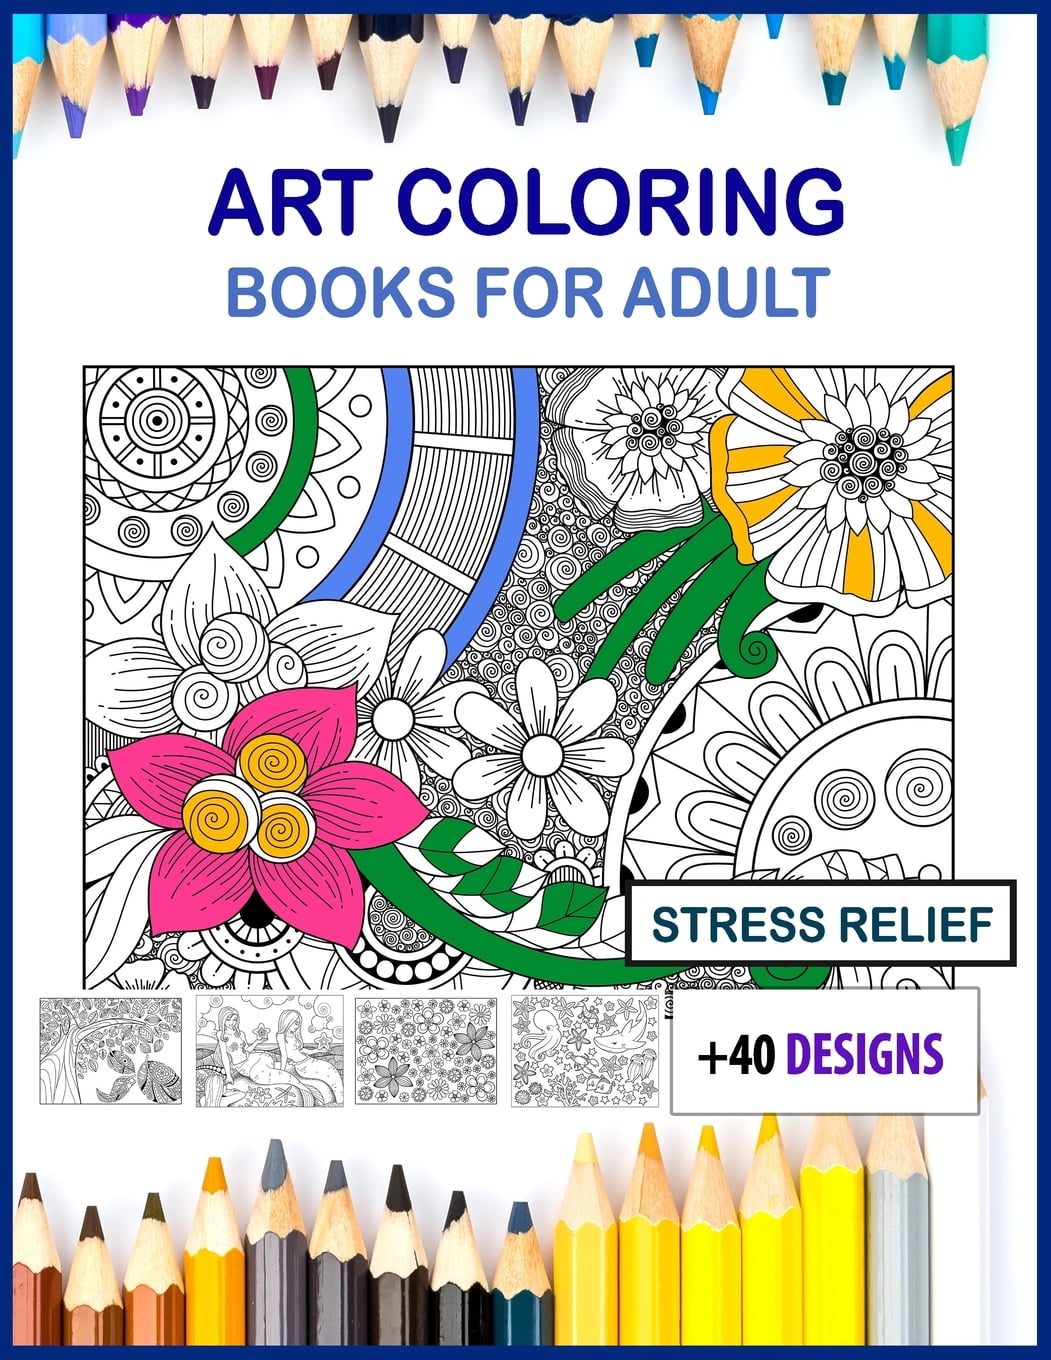 Art coloring books for adults large print : art coloring books for